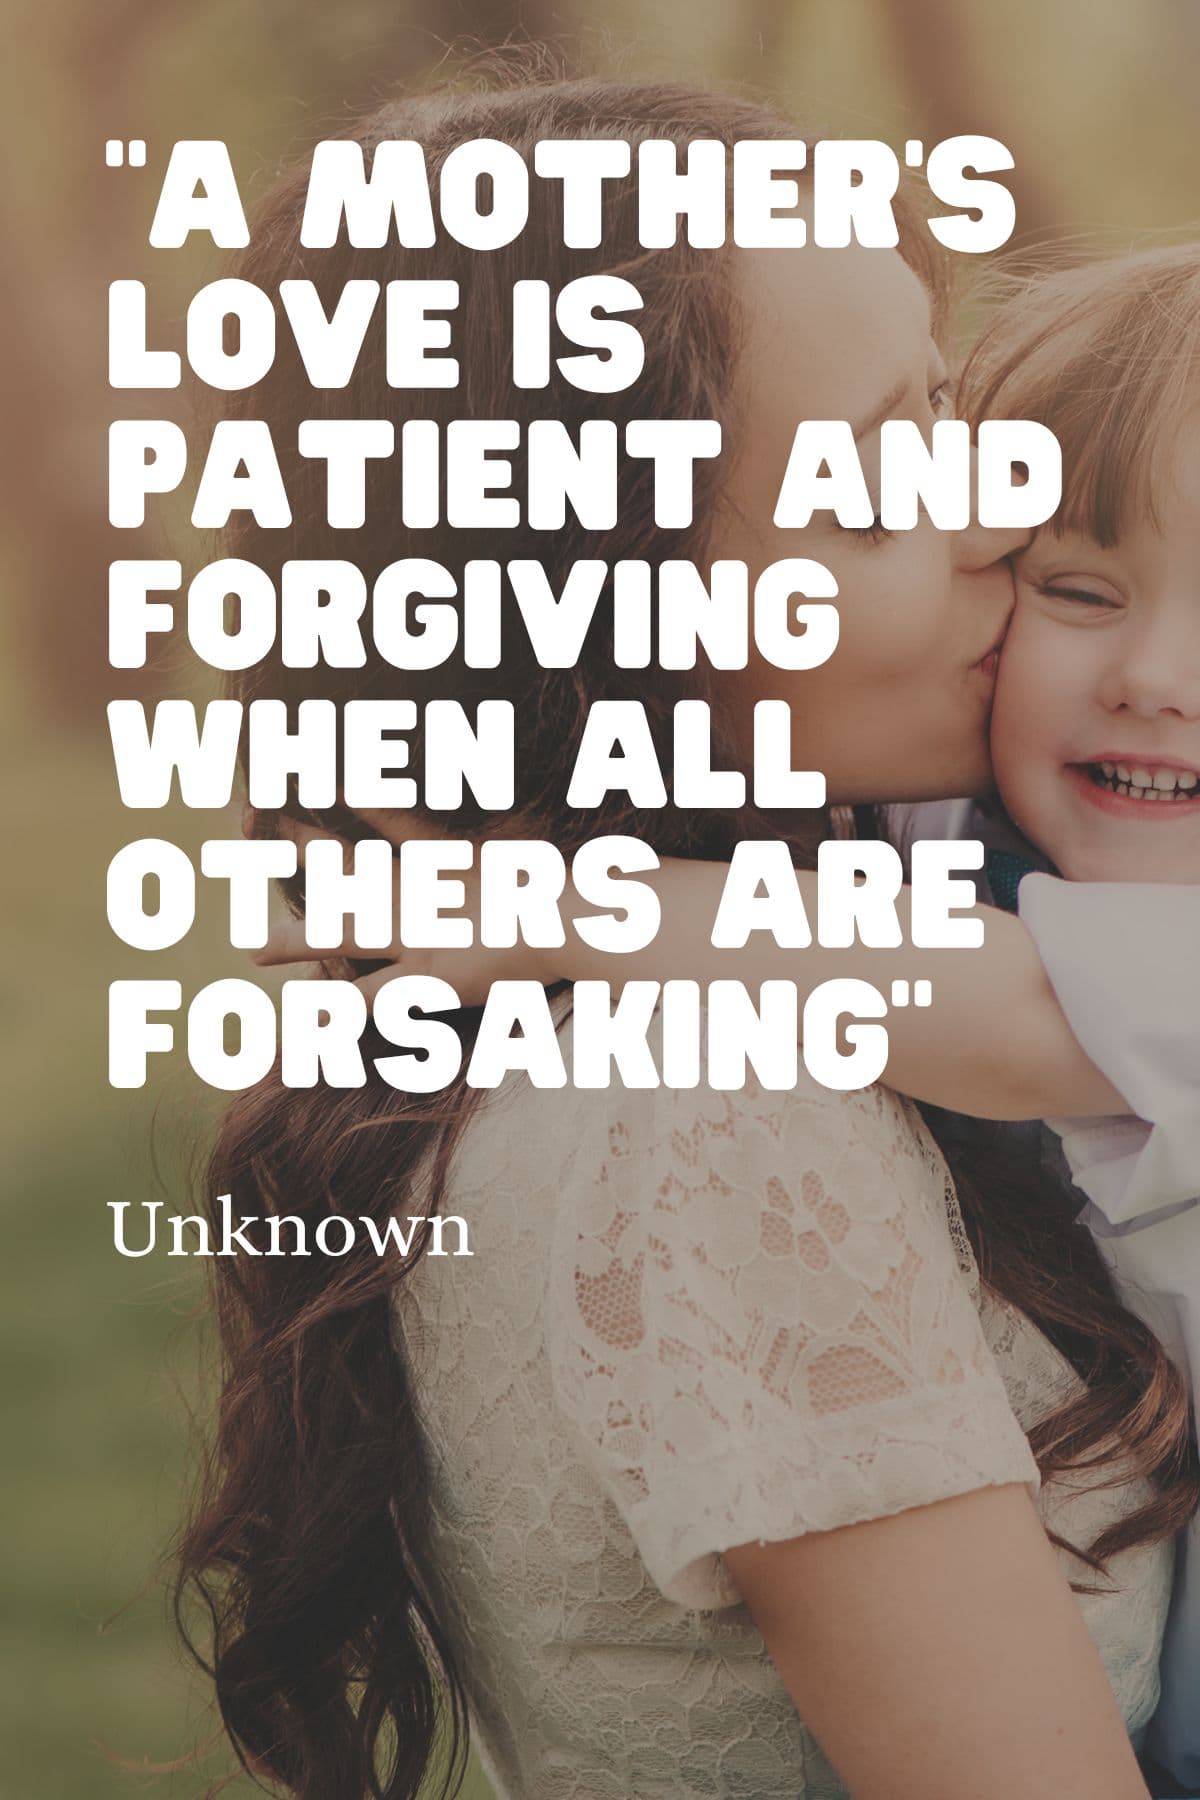 "A mother’s love is patient and forgiving when all others are forsaking" – Unknown, quote for loving your mother